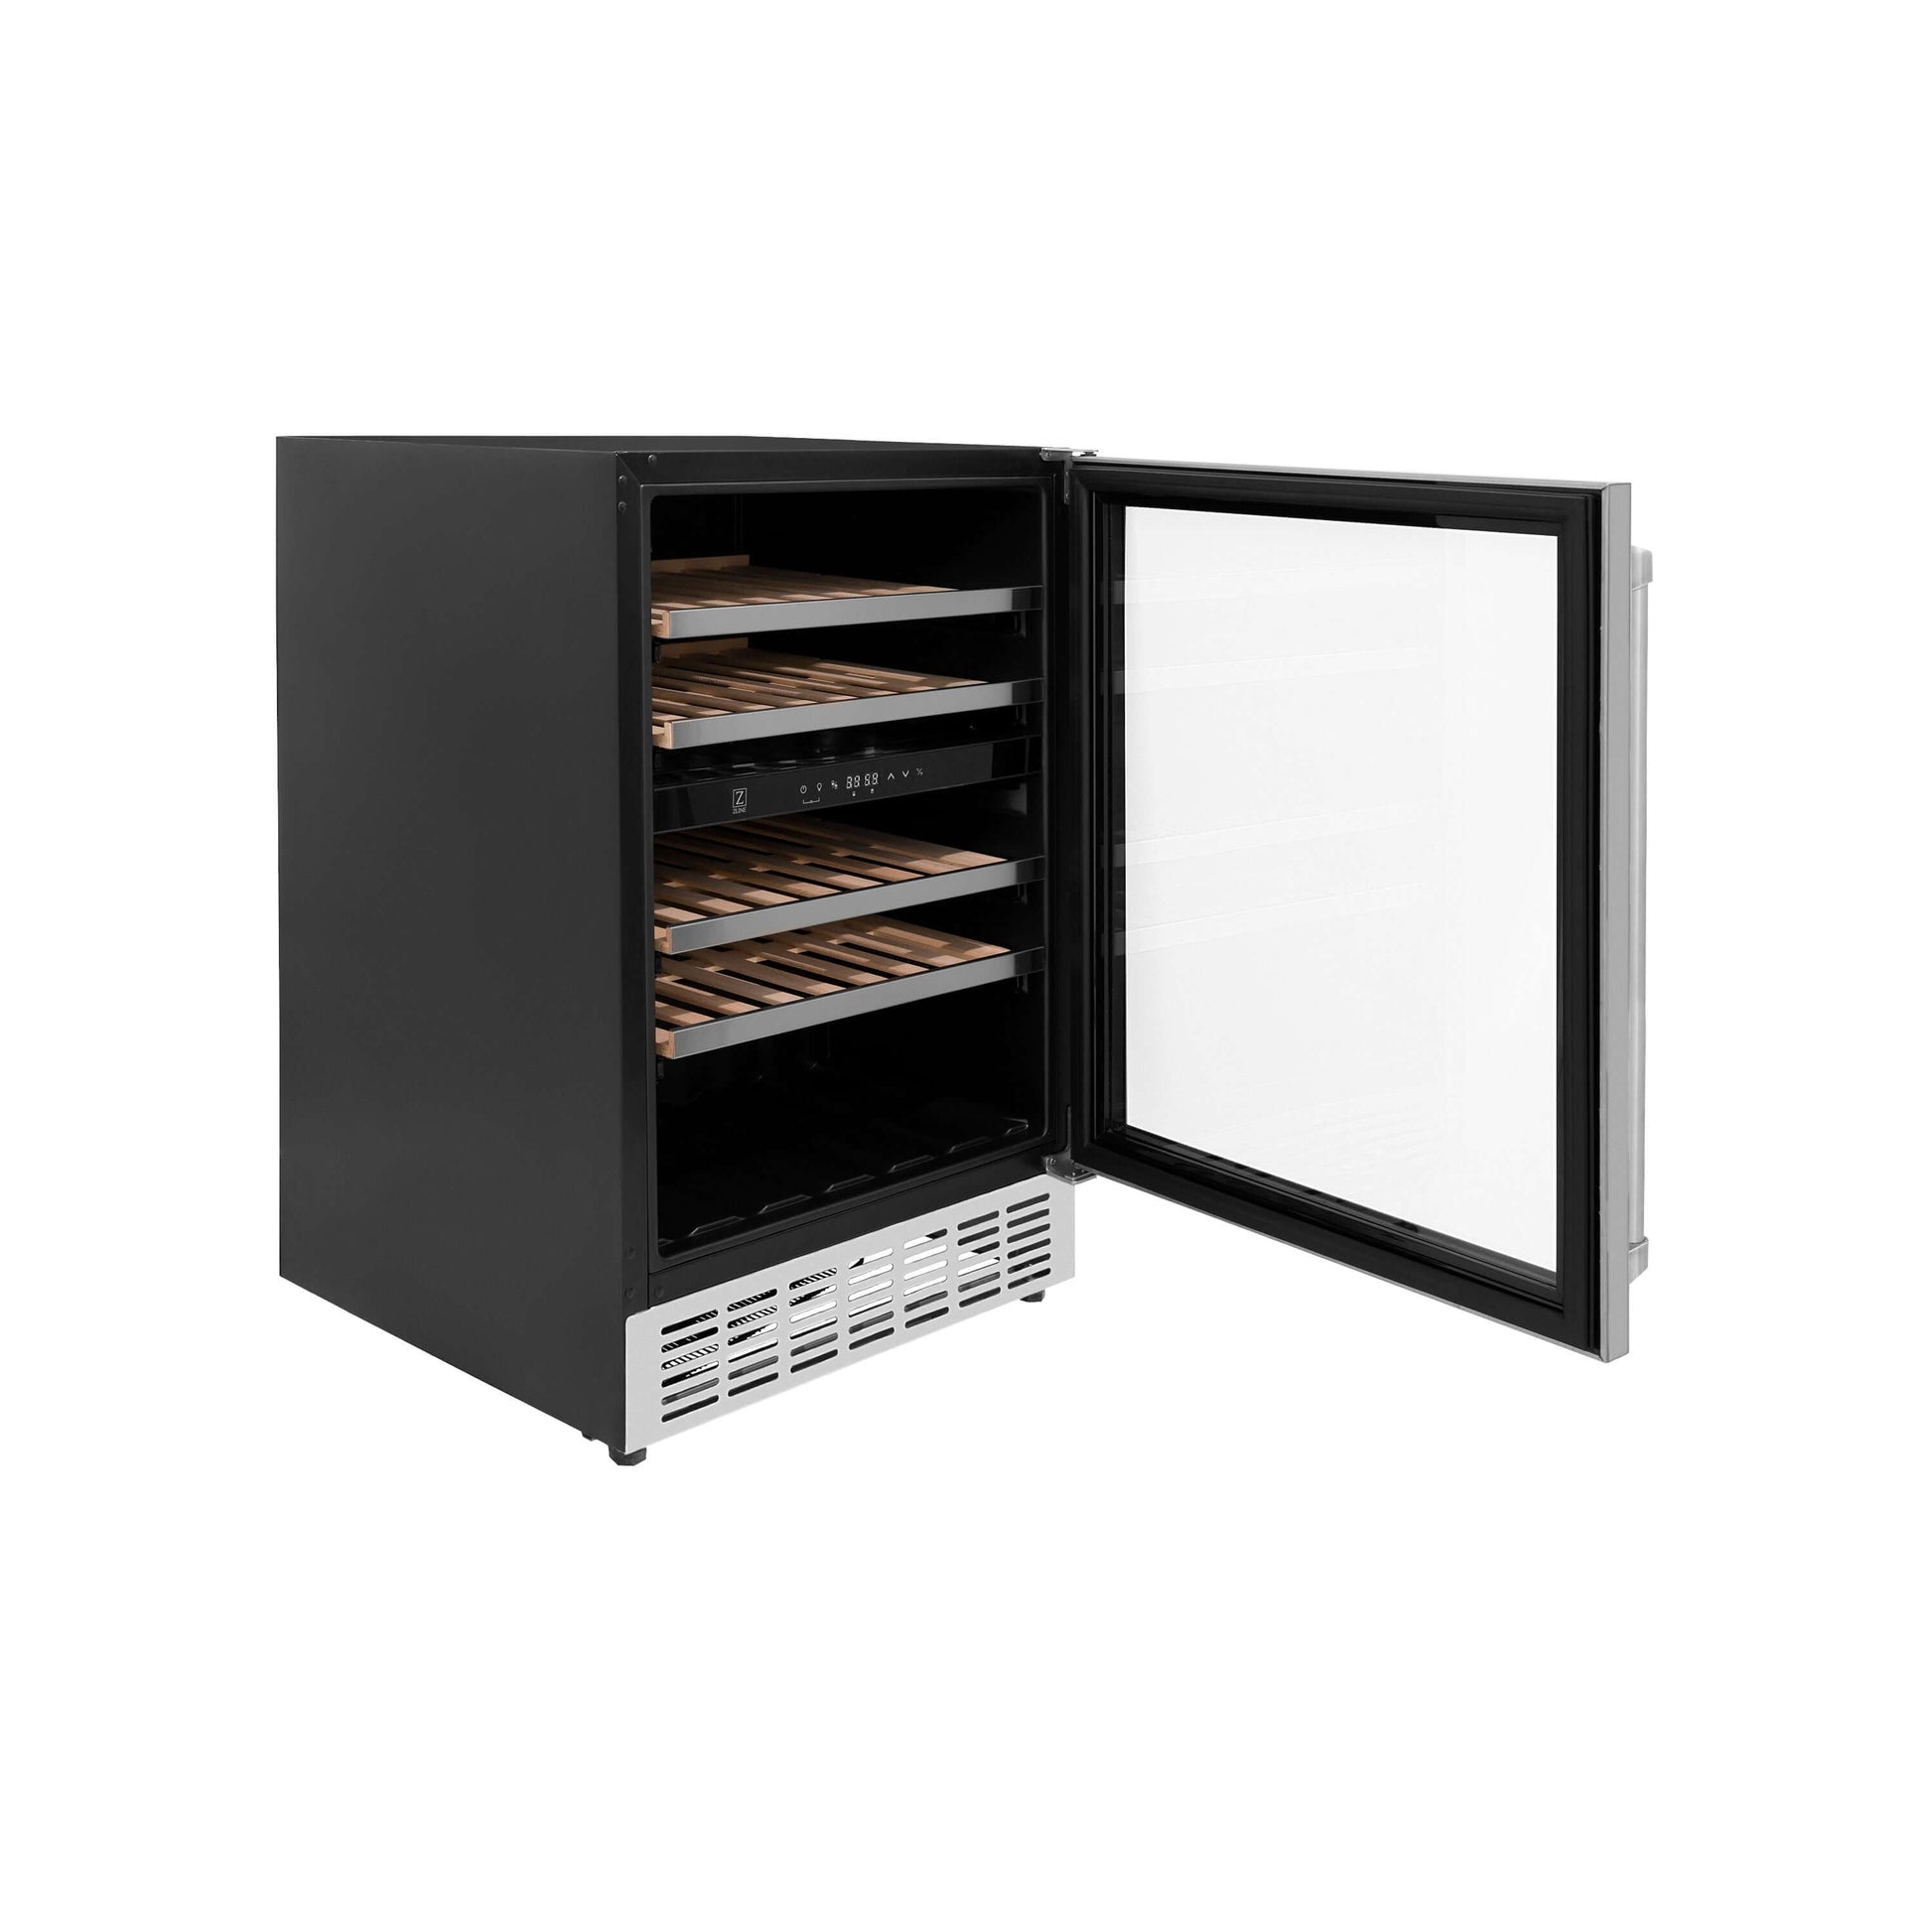 ZLINE 24" Monument Dual Zone 44 Bottle Wine Cooler - Stainless Steel with Wood Shelf